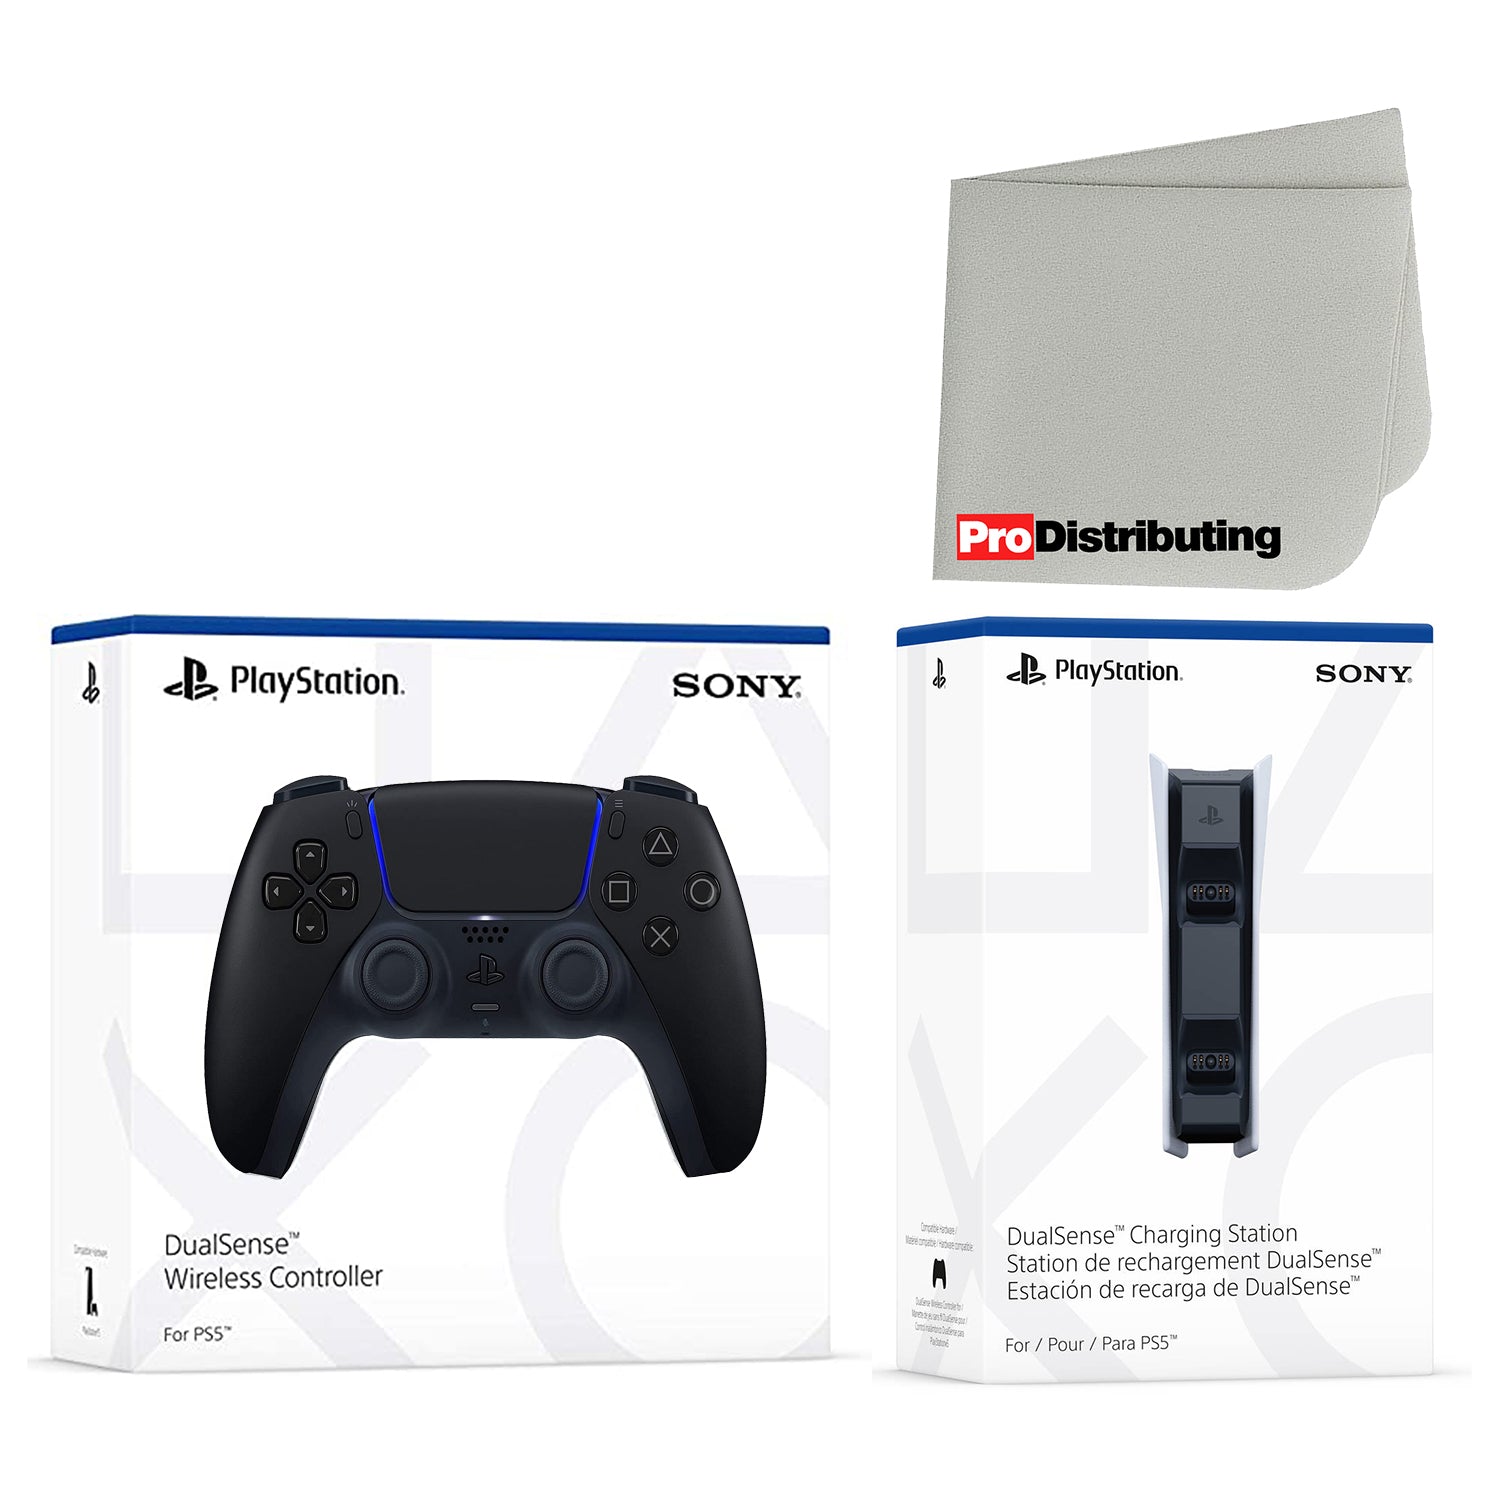 Sony PlayStation 5 Black DualSense Wireless Controller and Charging Station with Microfiber Cleaning Cloth - Pro-Distributing